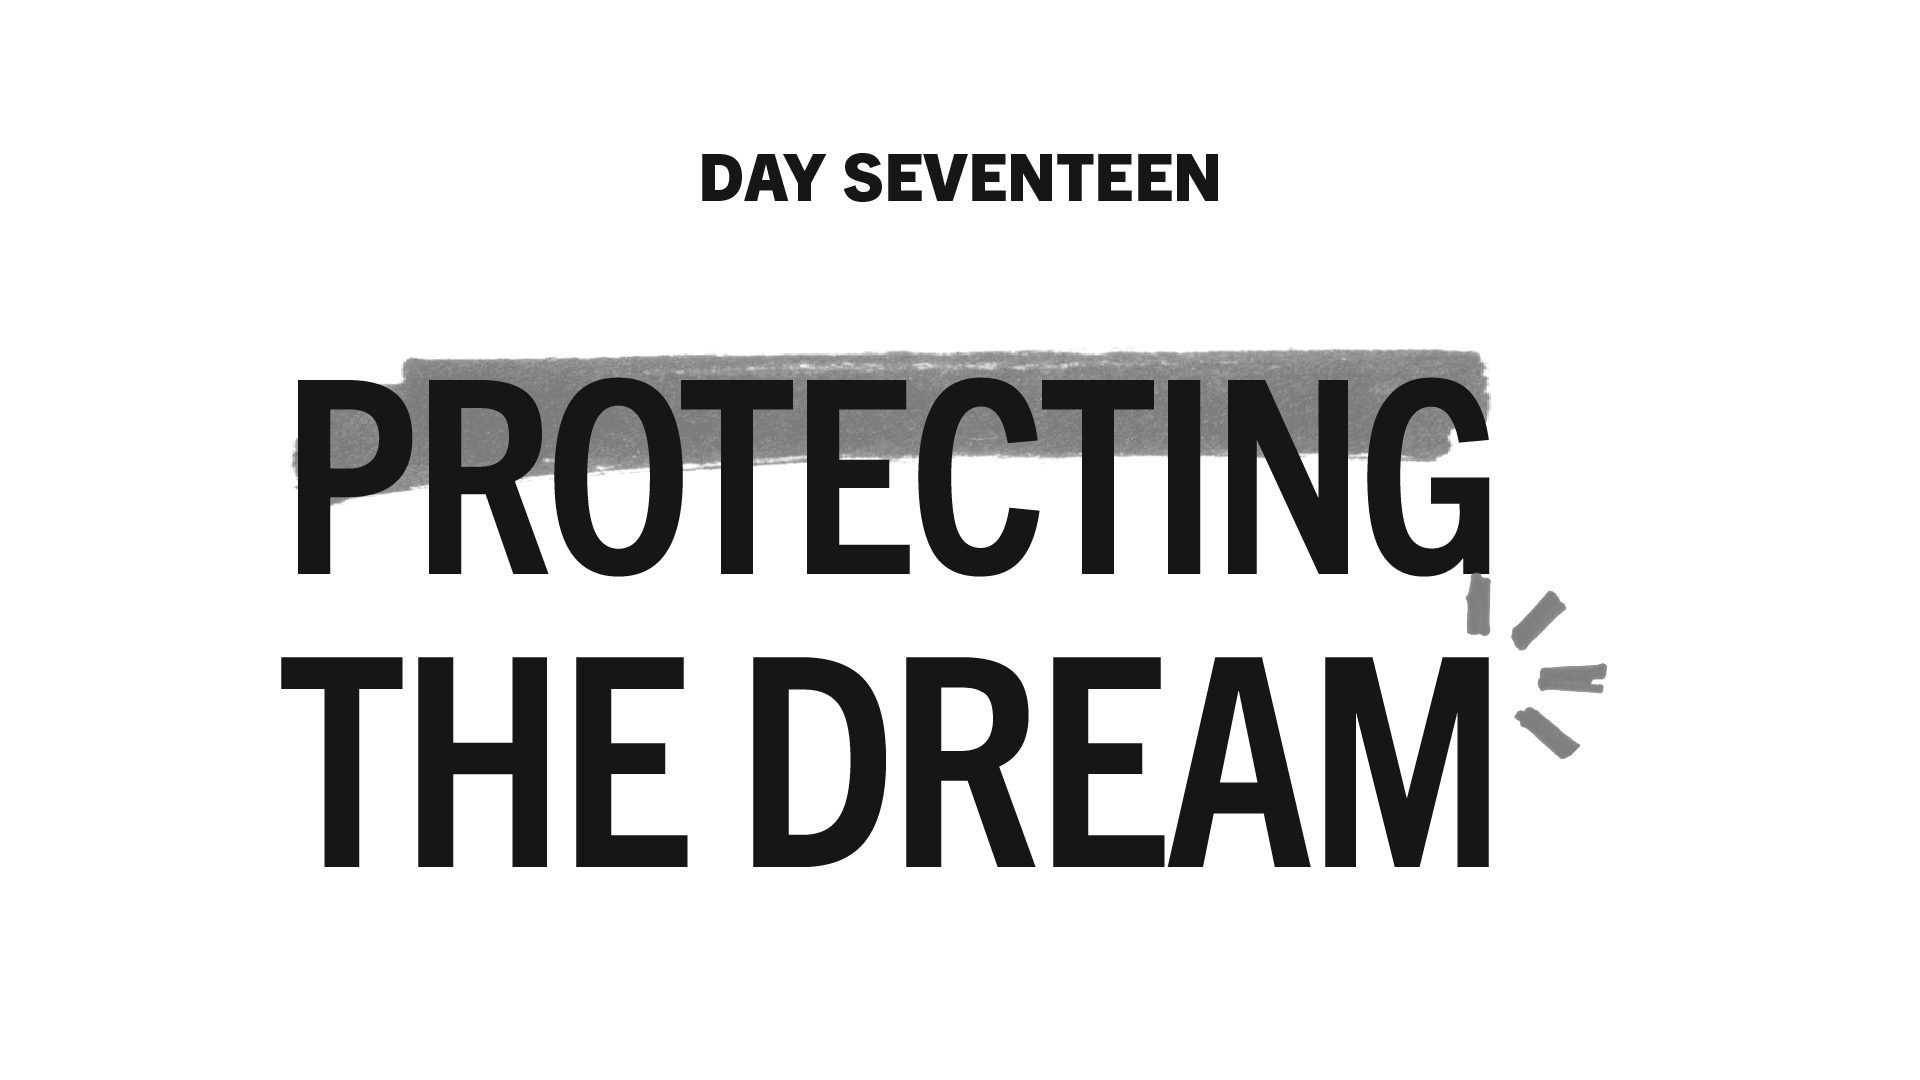 Day 17: Protecting The Dream